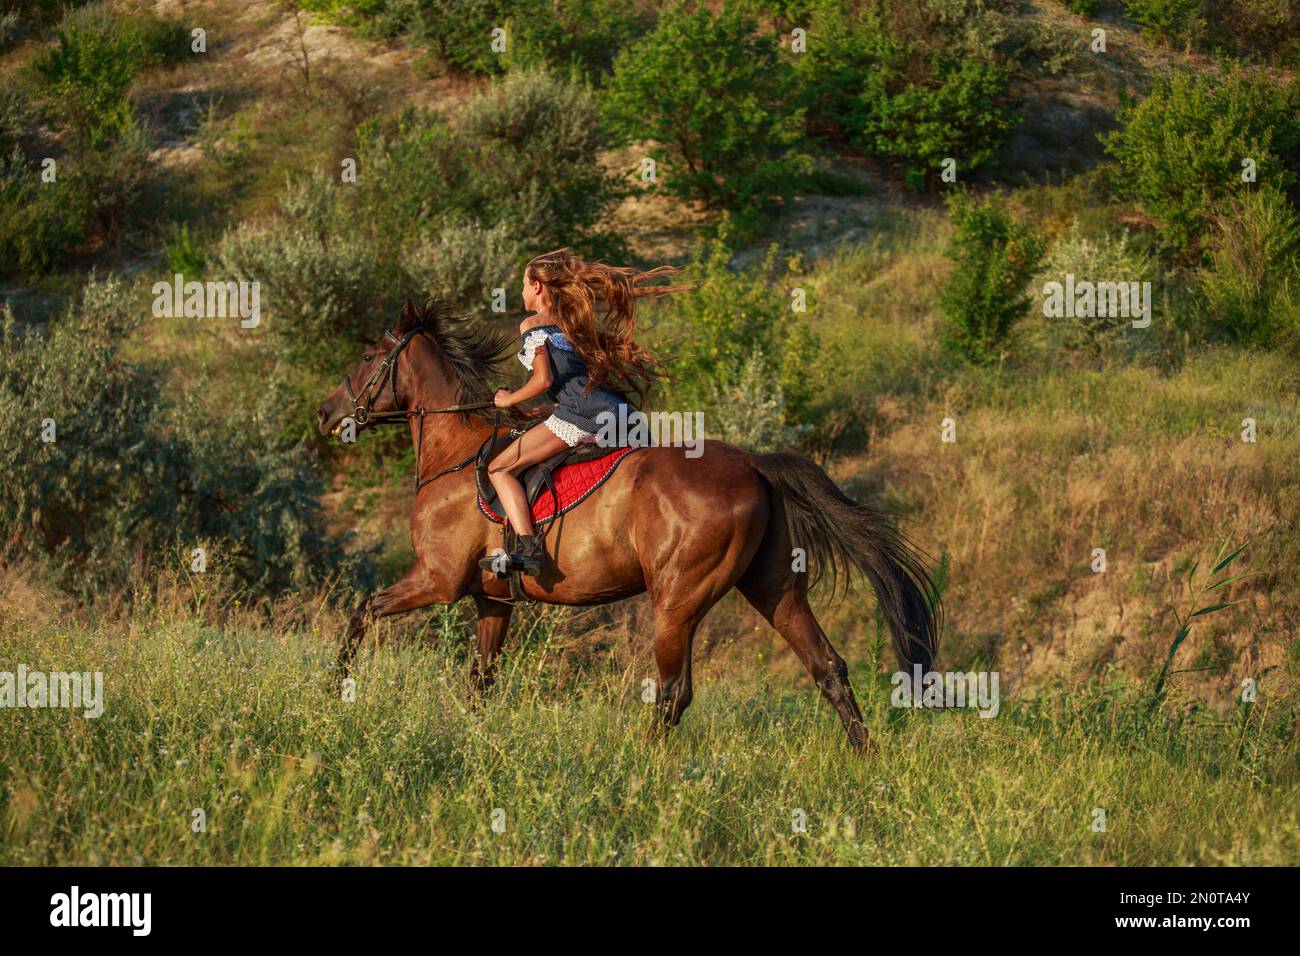 Girl riding a horse in nature Stock Photo